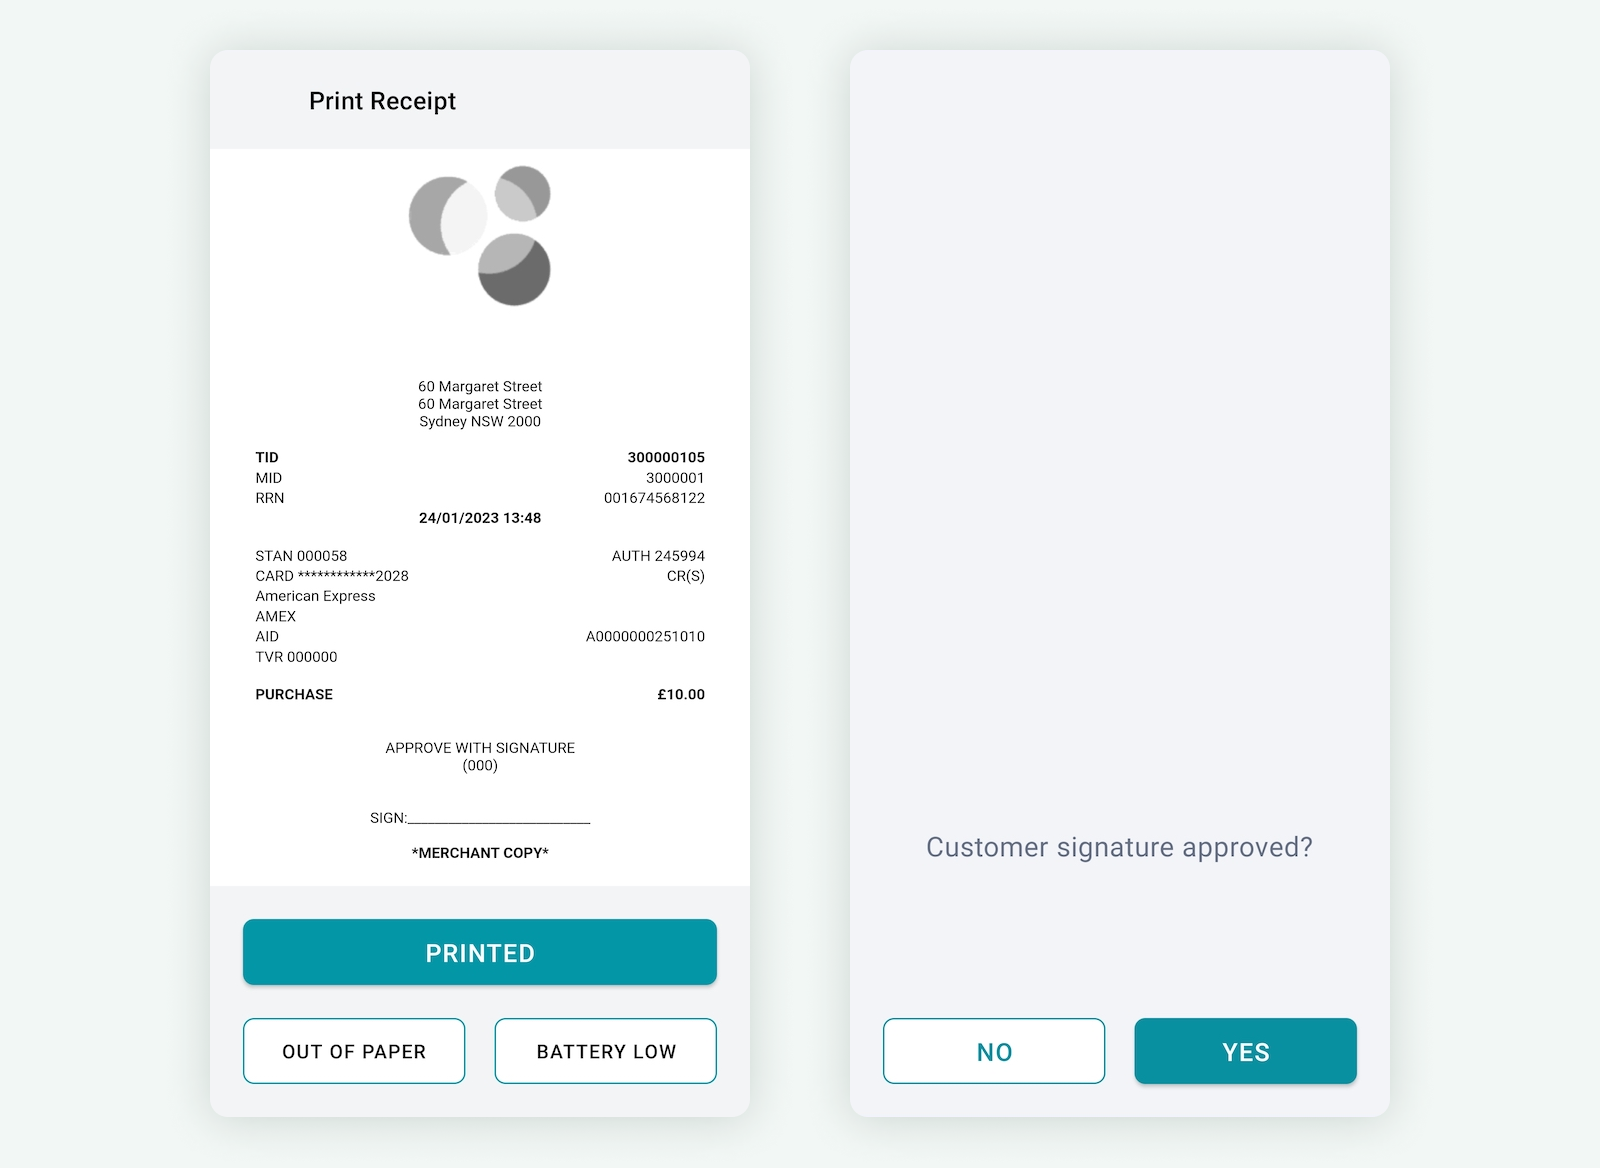 Screenshots of Gecko Bank: the 'receipt to sign' screen and the 'Customer signature approved?' screen.